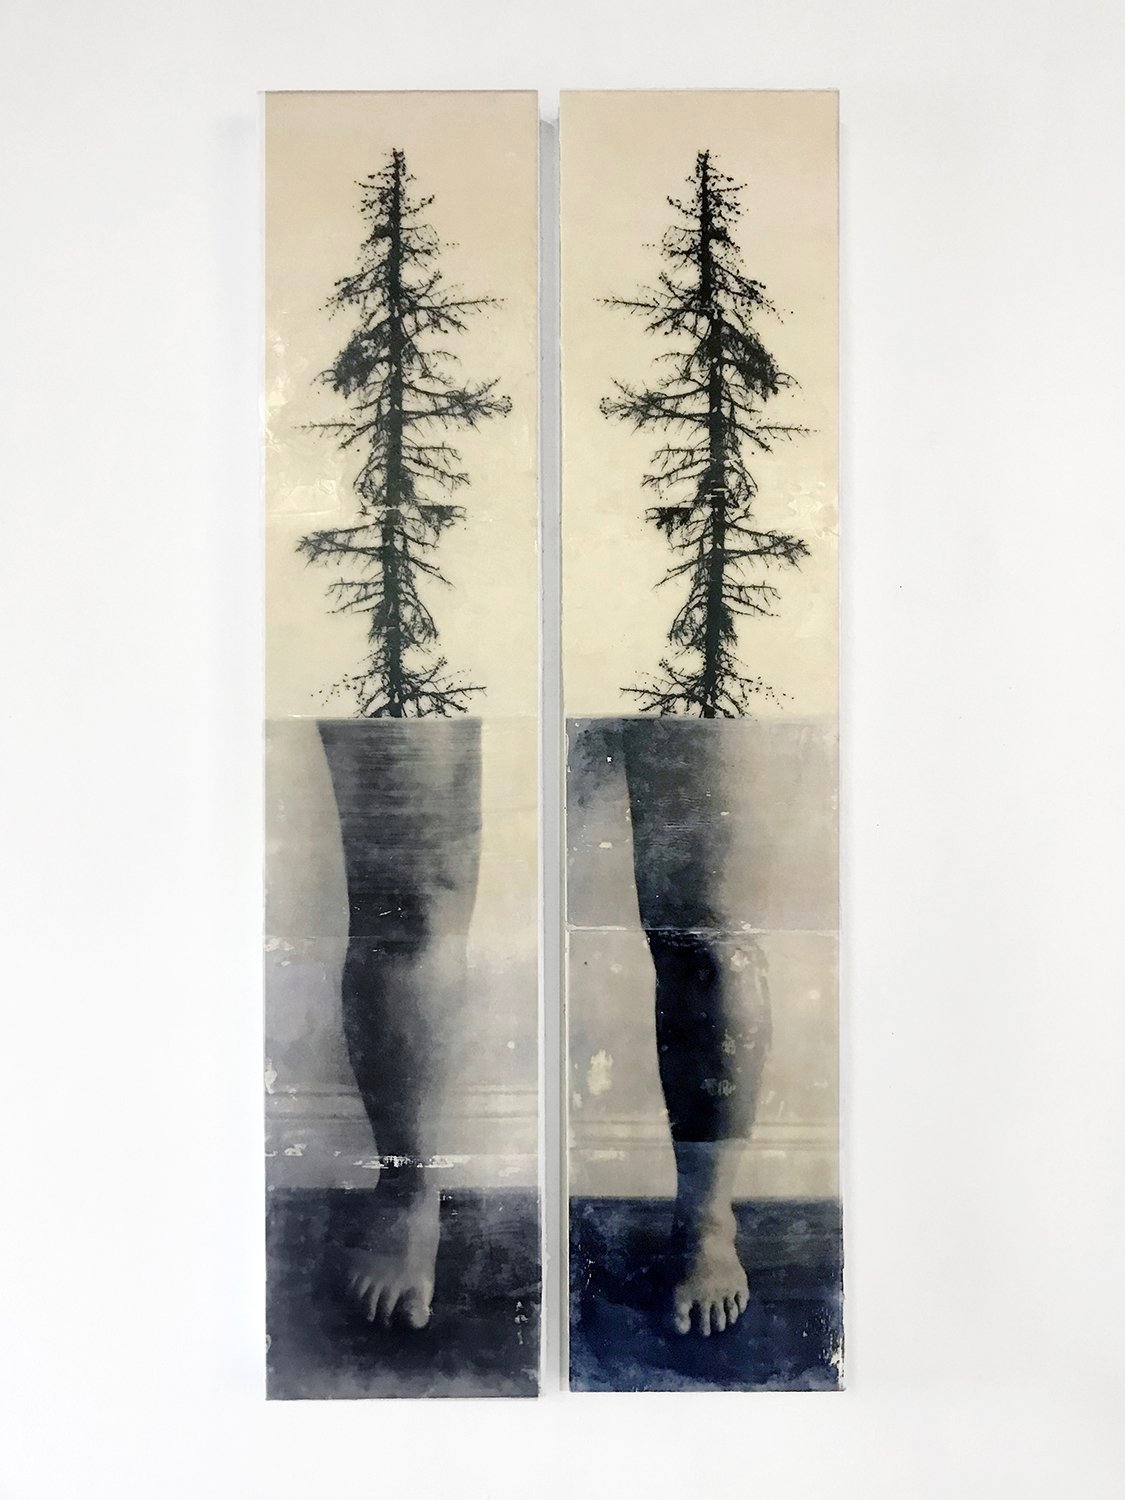  Jessica Burko,  Here We Stand , 2017, Found wood with image transfers in encaustic, 54 x 11.5 inches, Purchase: $2,600 